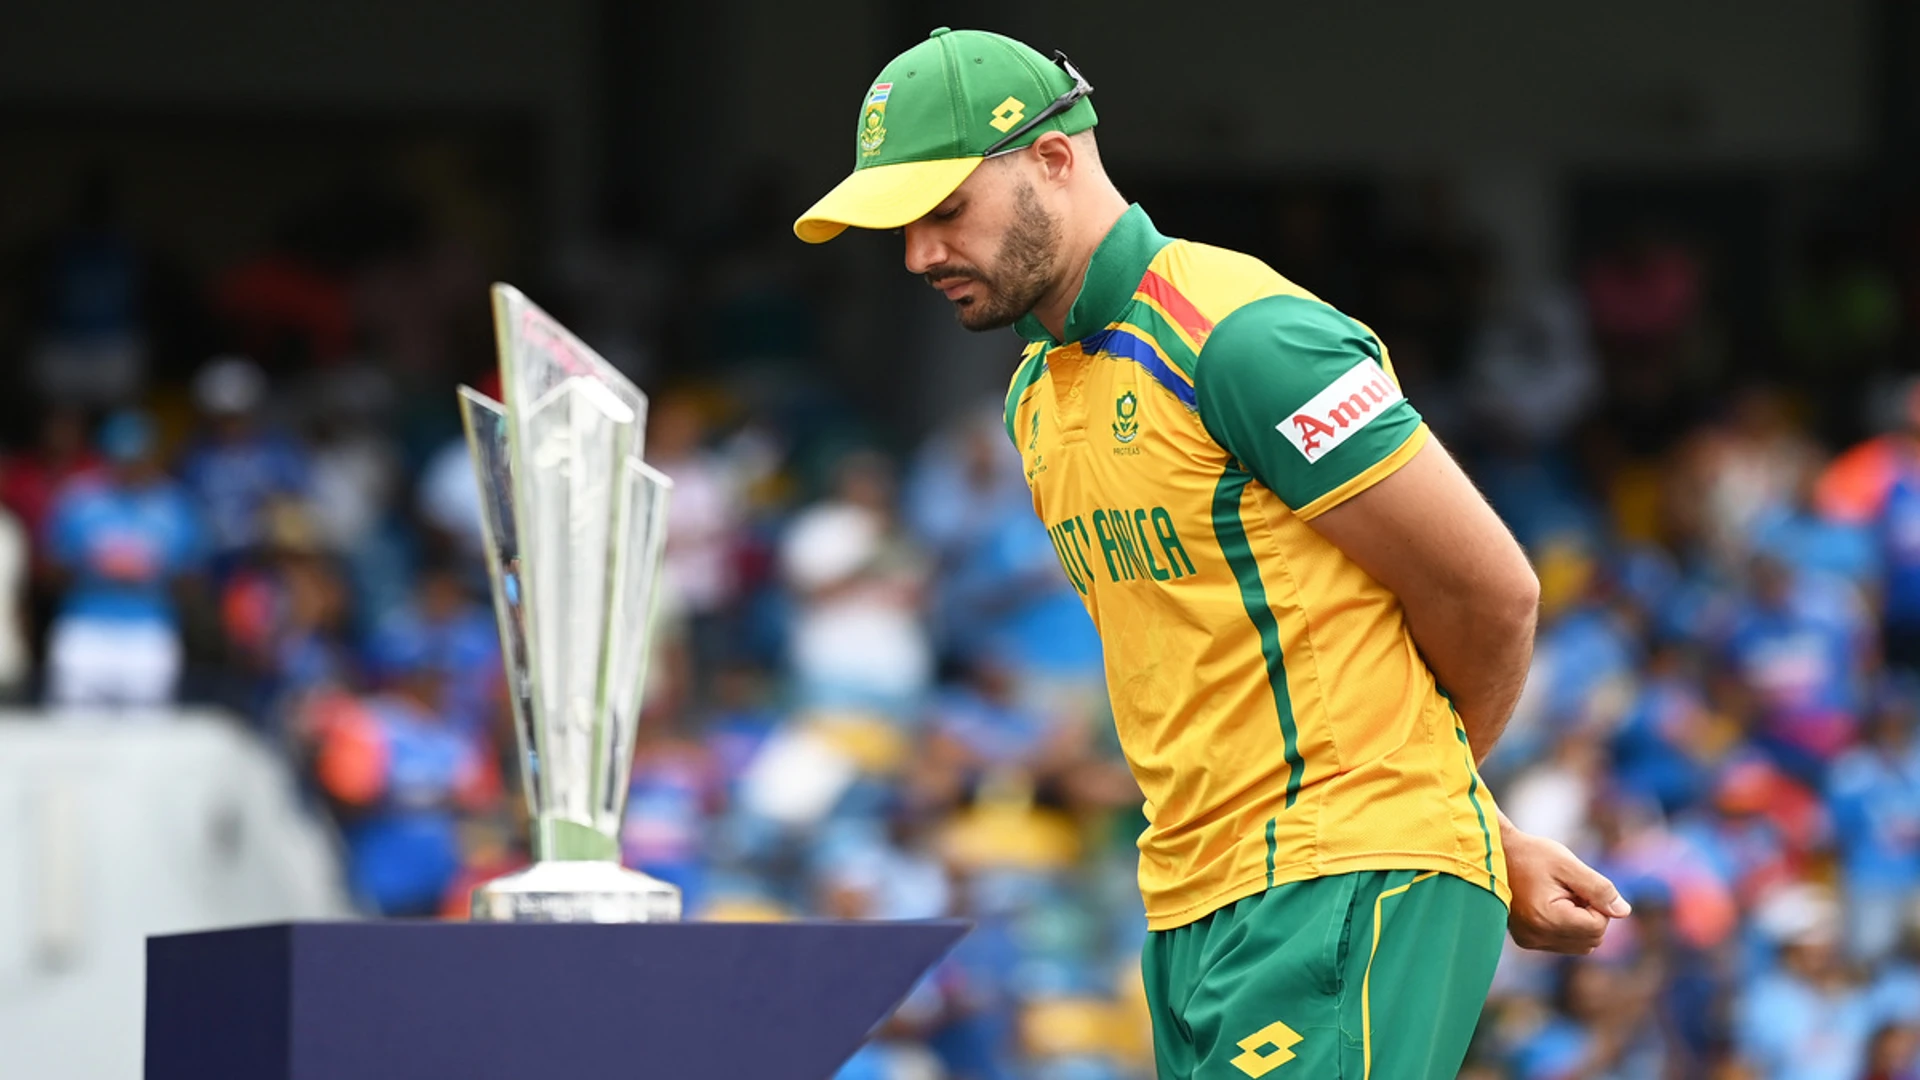 PLAYER RATINGS: How the Proteas performed at the T20 World Cup